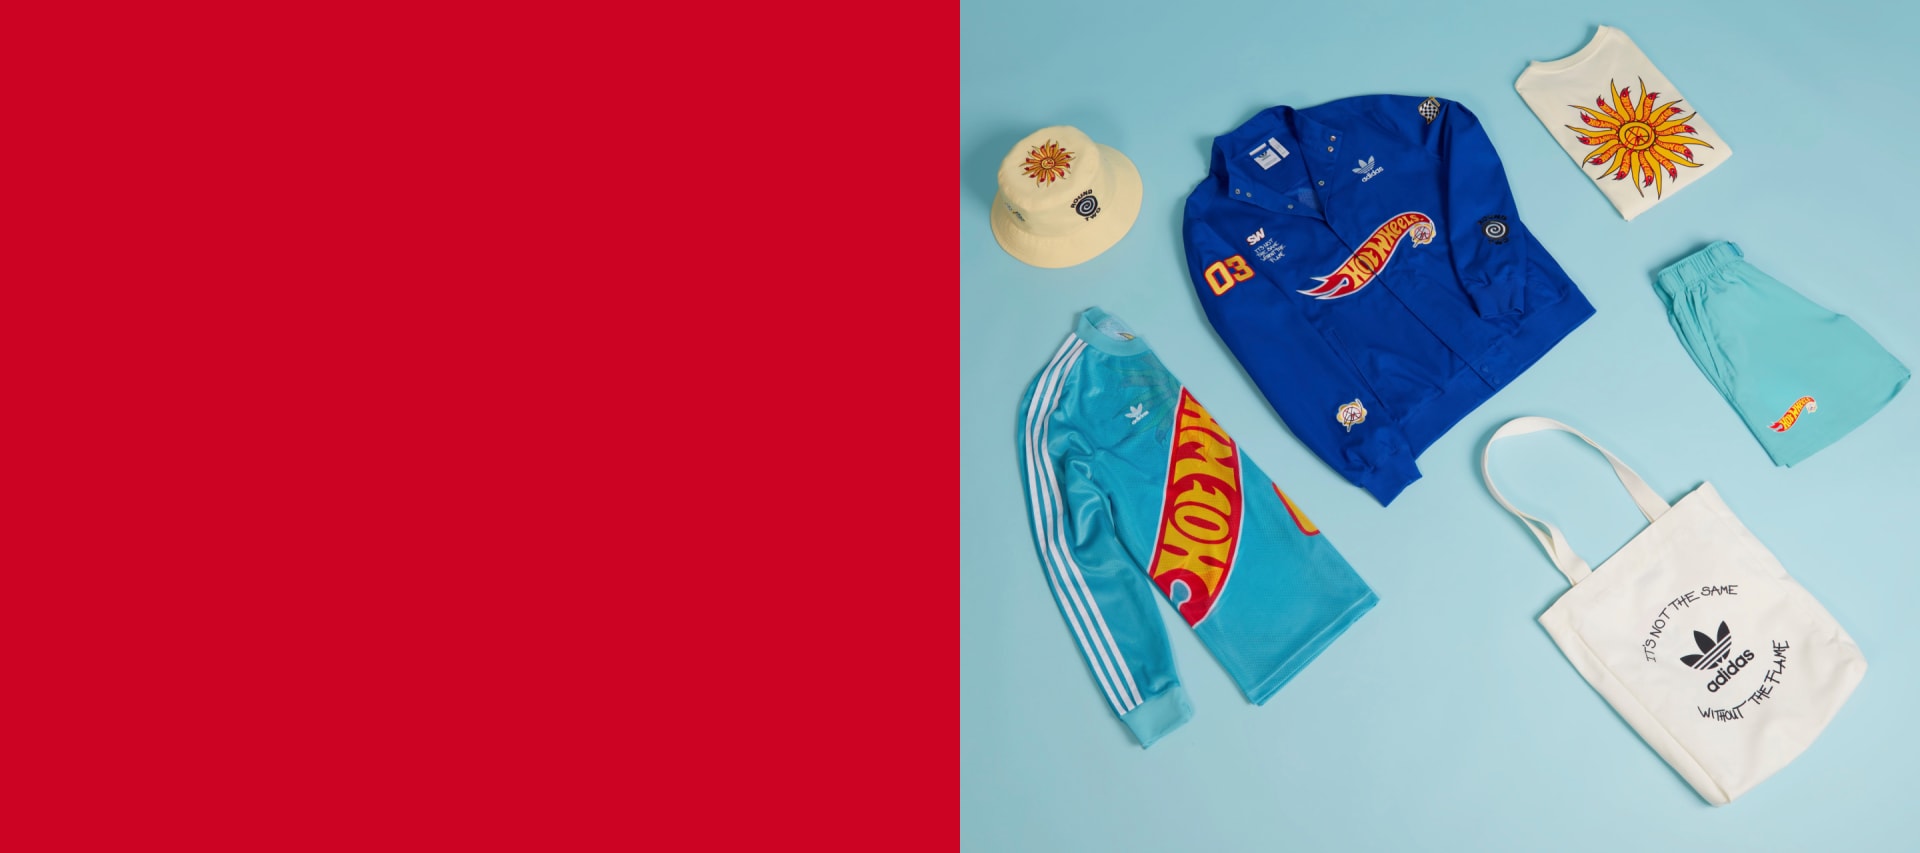 Flat lay of the adidas Originals x Sean Wotherspoon x Hot Wheels collection including apparel, footwear and accessories.